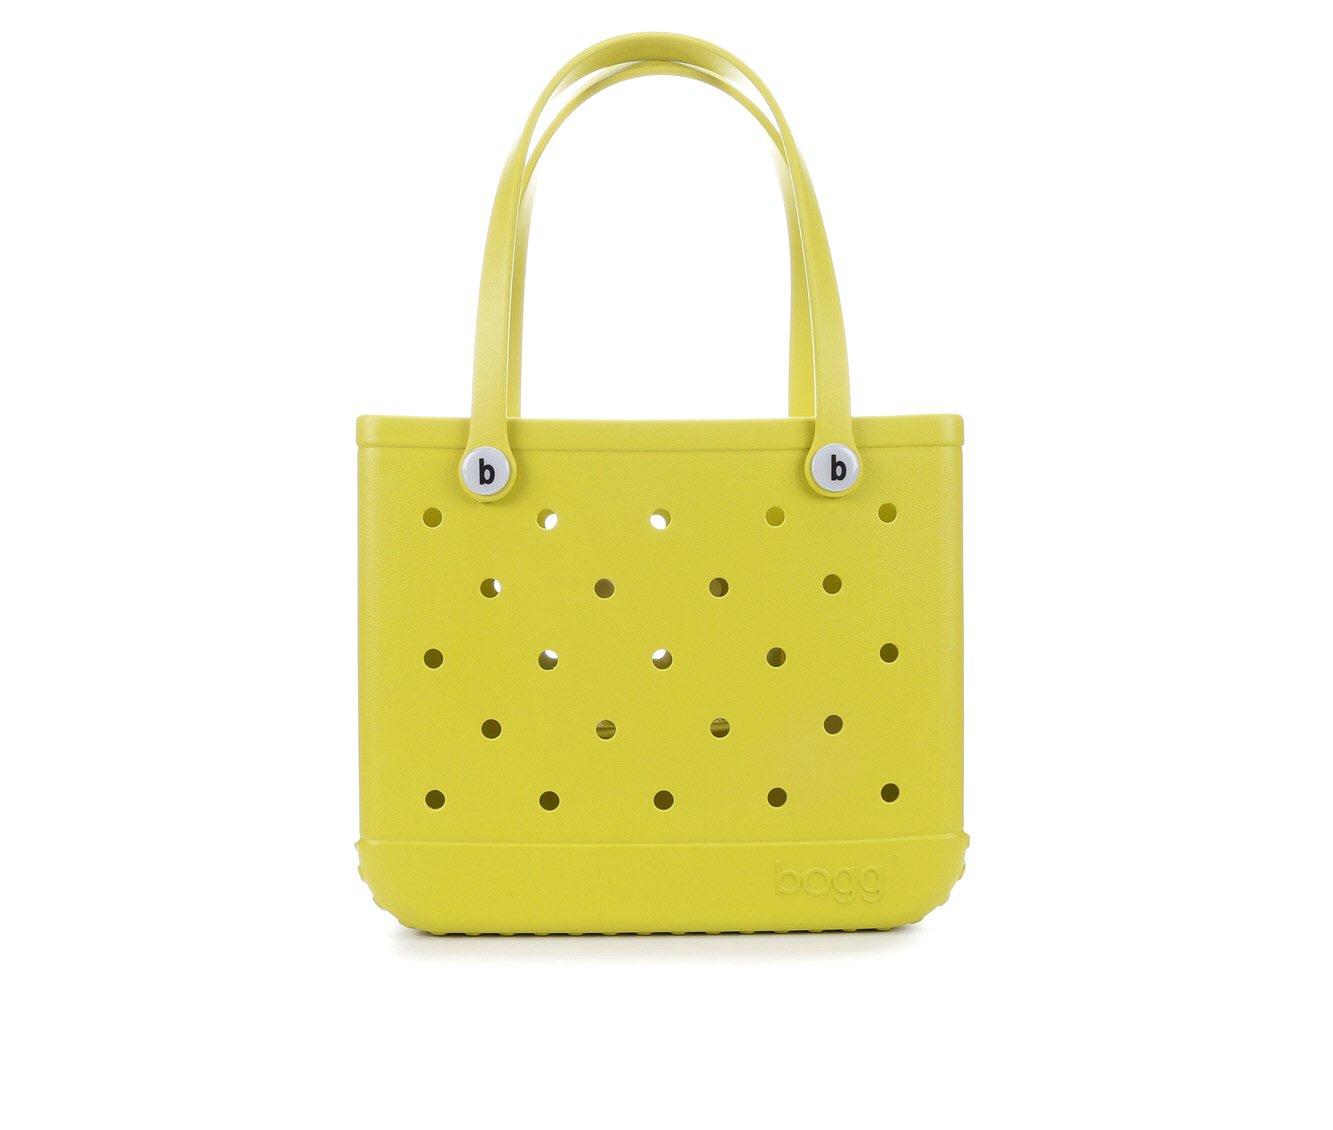 Bogg Bag Baby - YELLOW-there